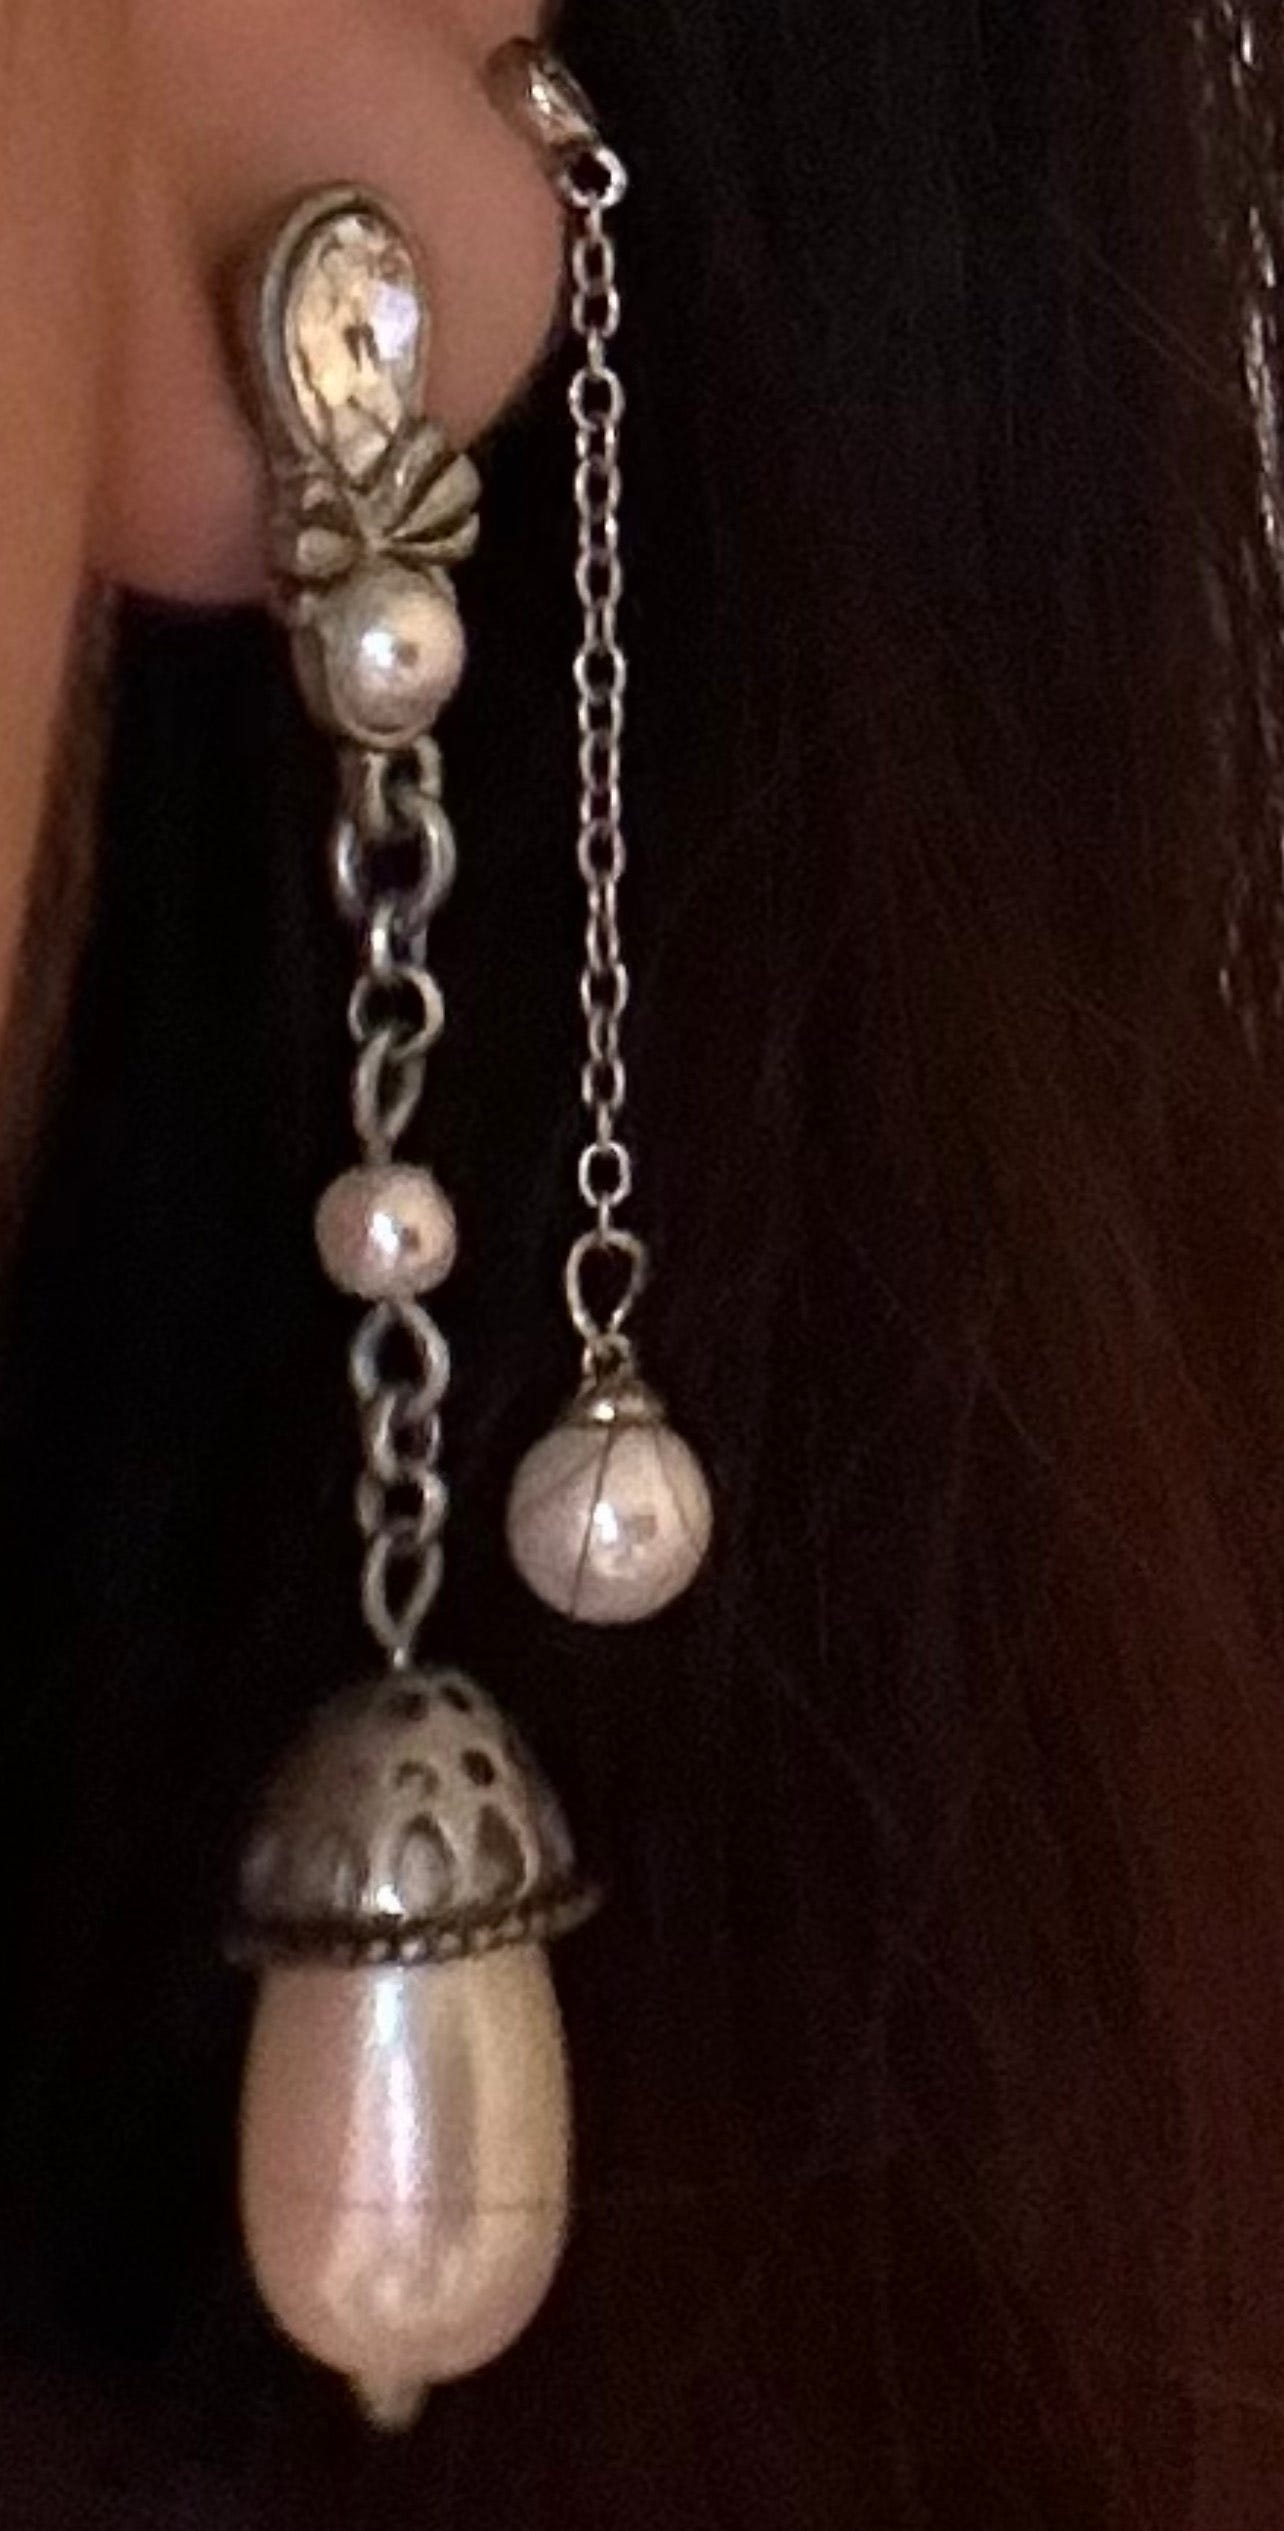 the bottom half of a white person's earlobe wearing silver dangling earrings with pearl embellishments in each of two piercings.